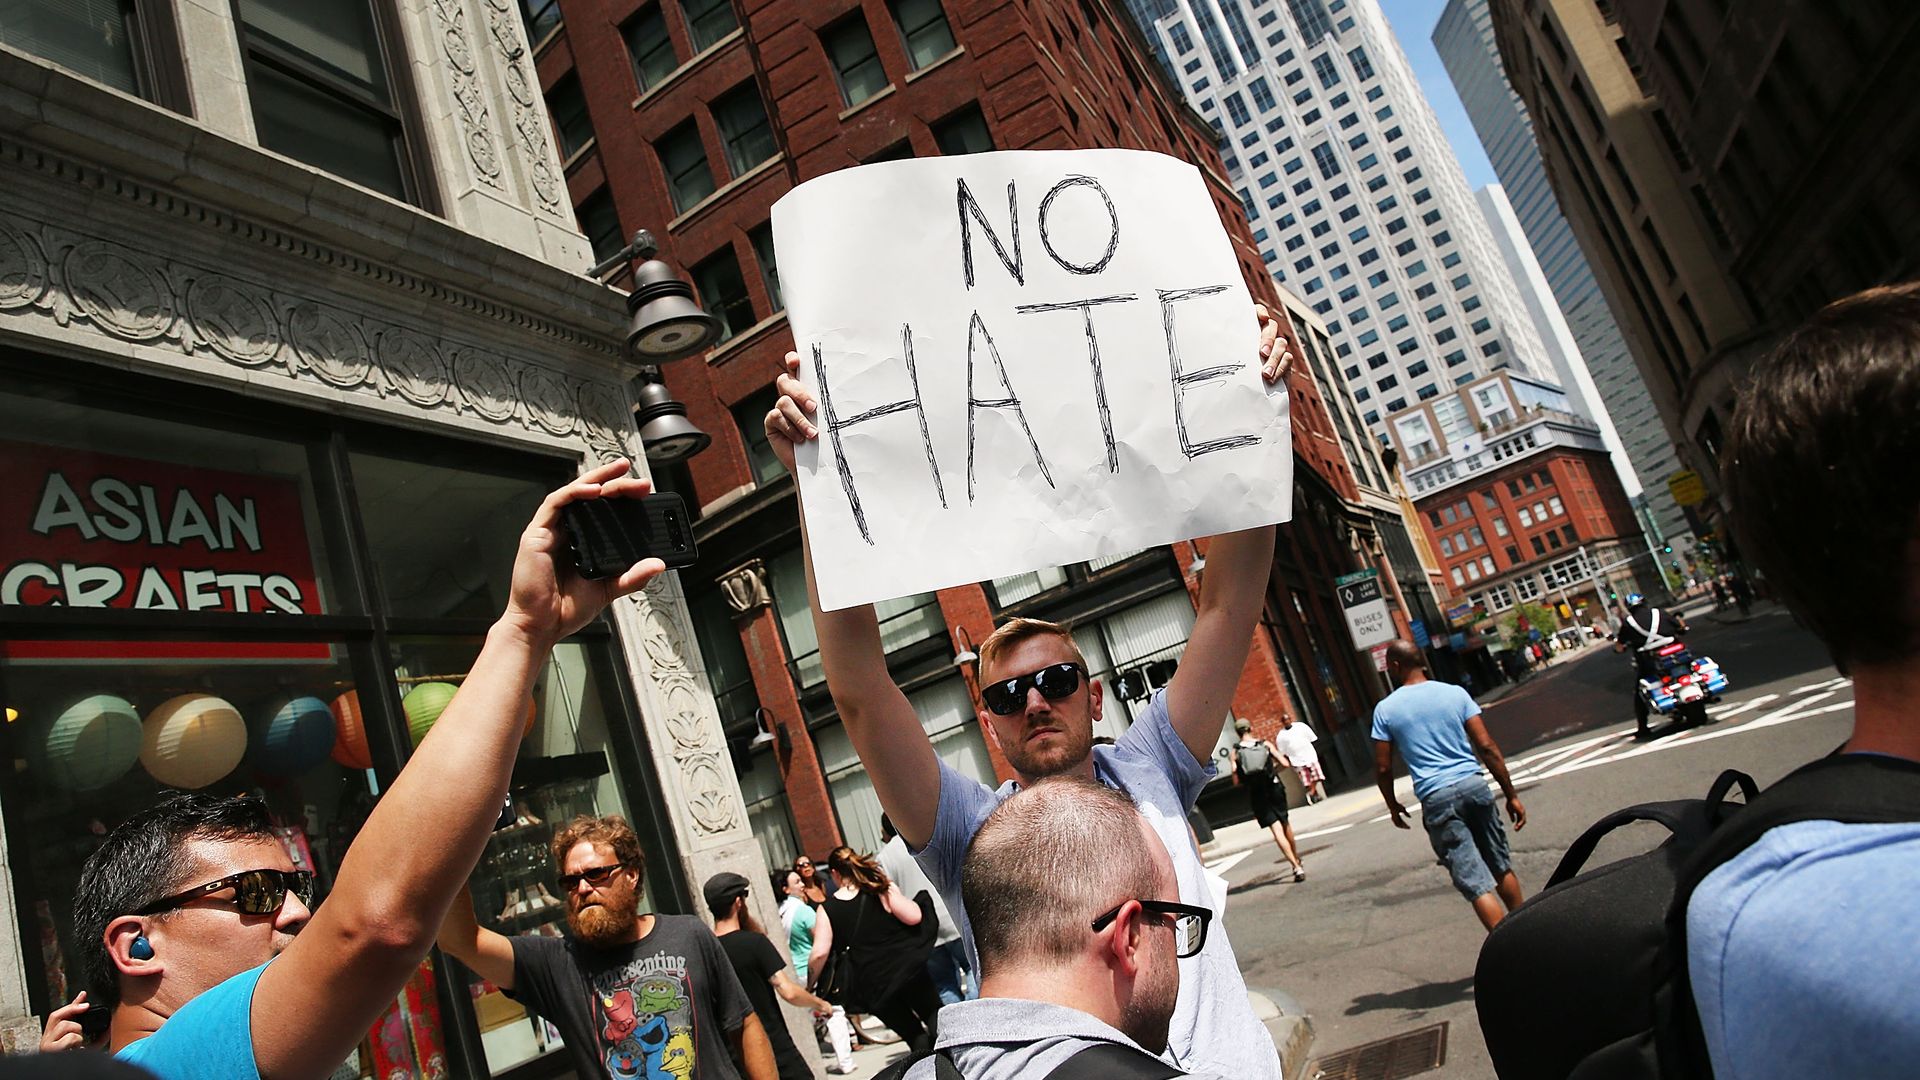 A counter-protestor in Boston holds a sign that reads "No hate" 